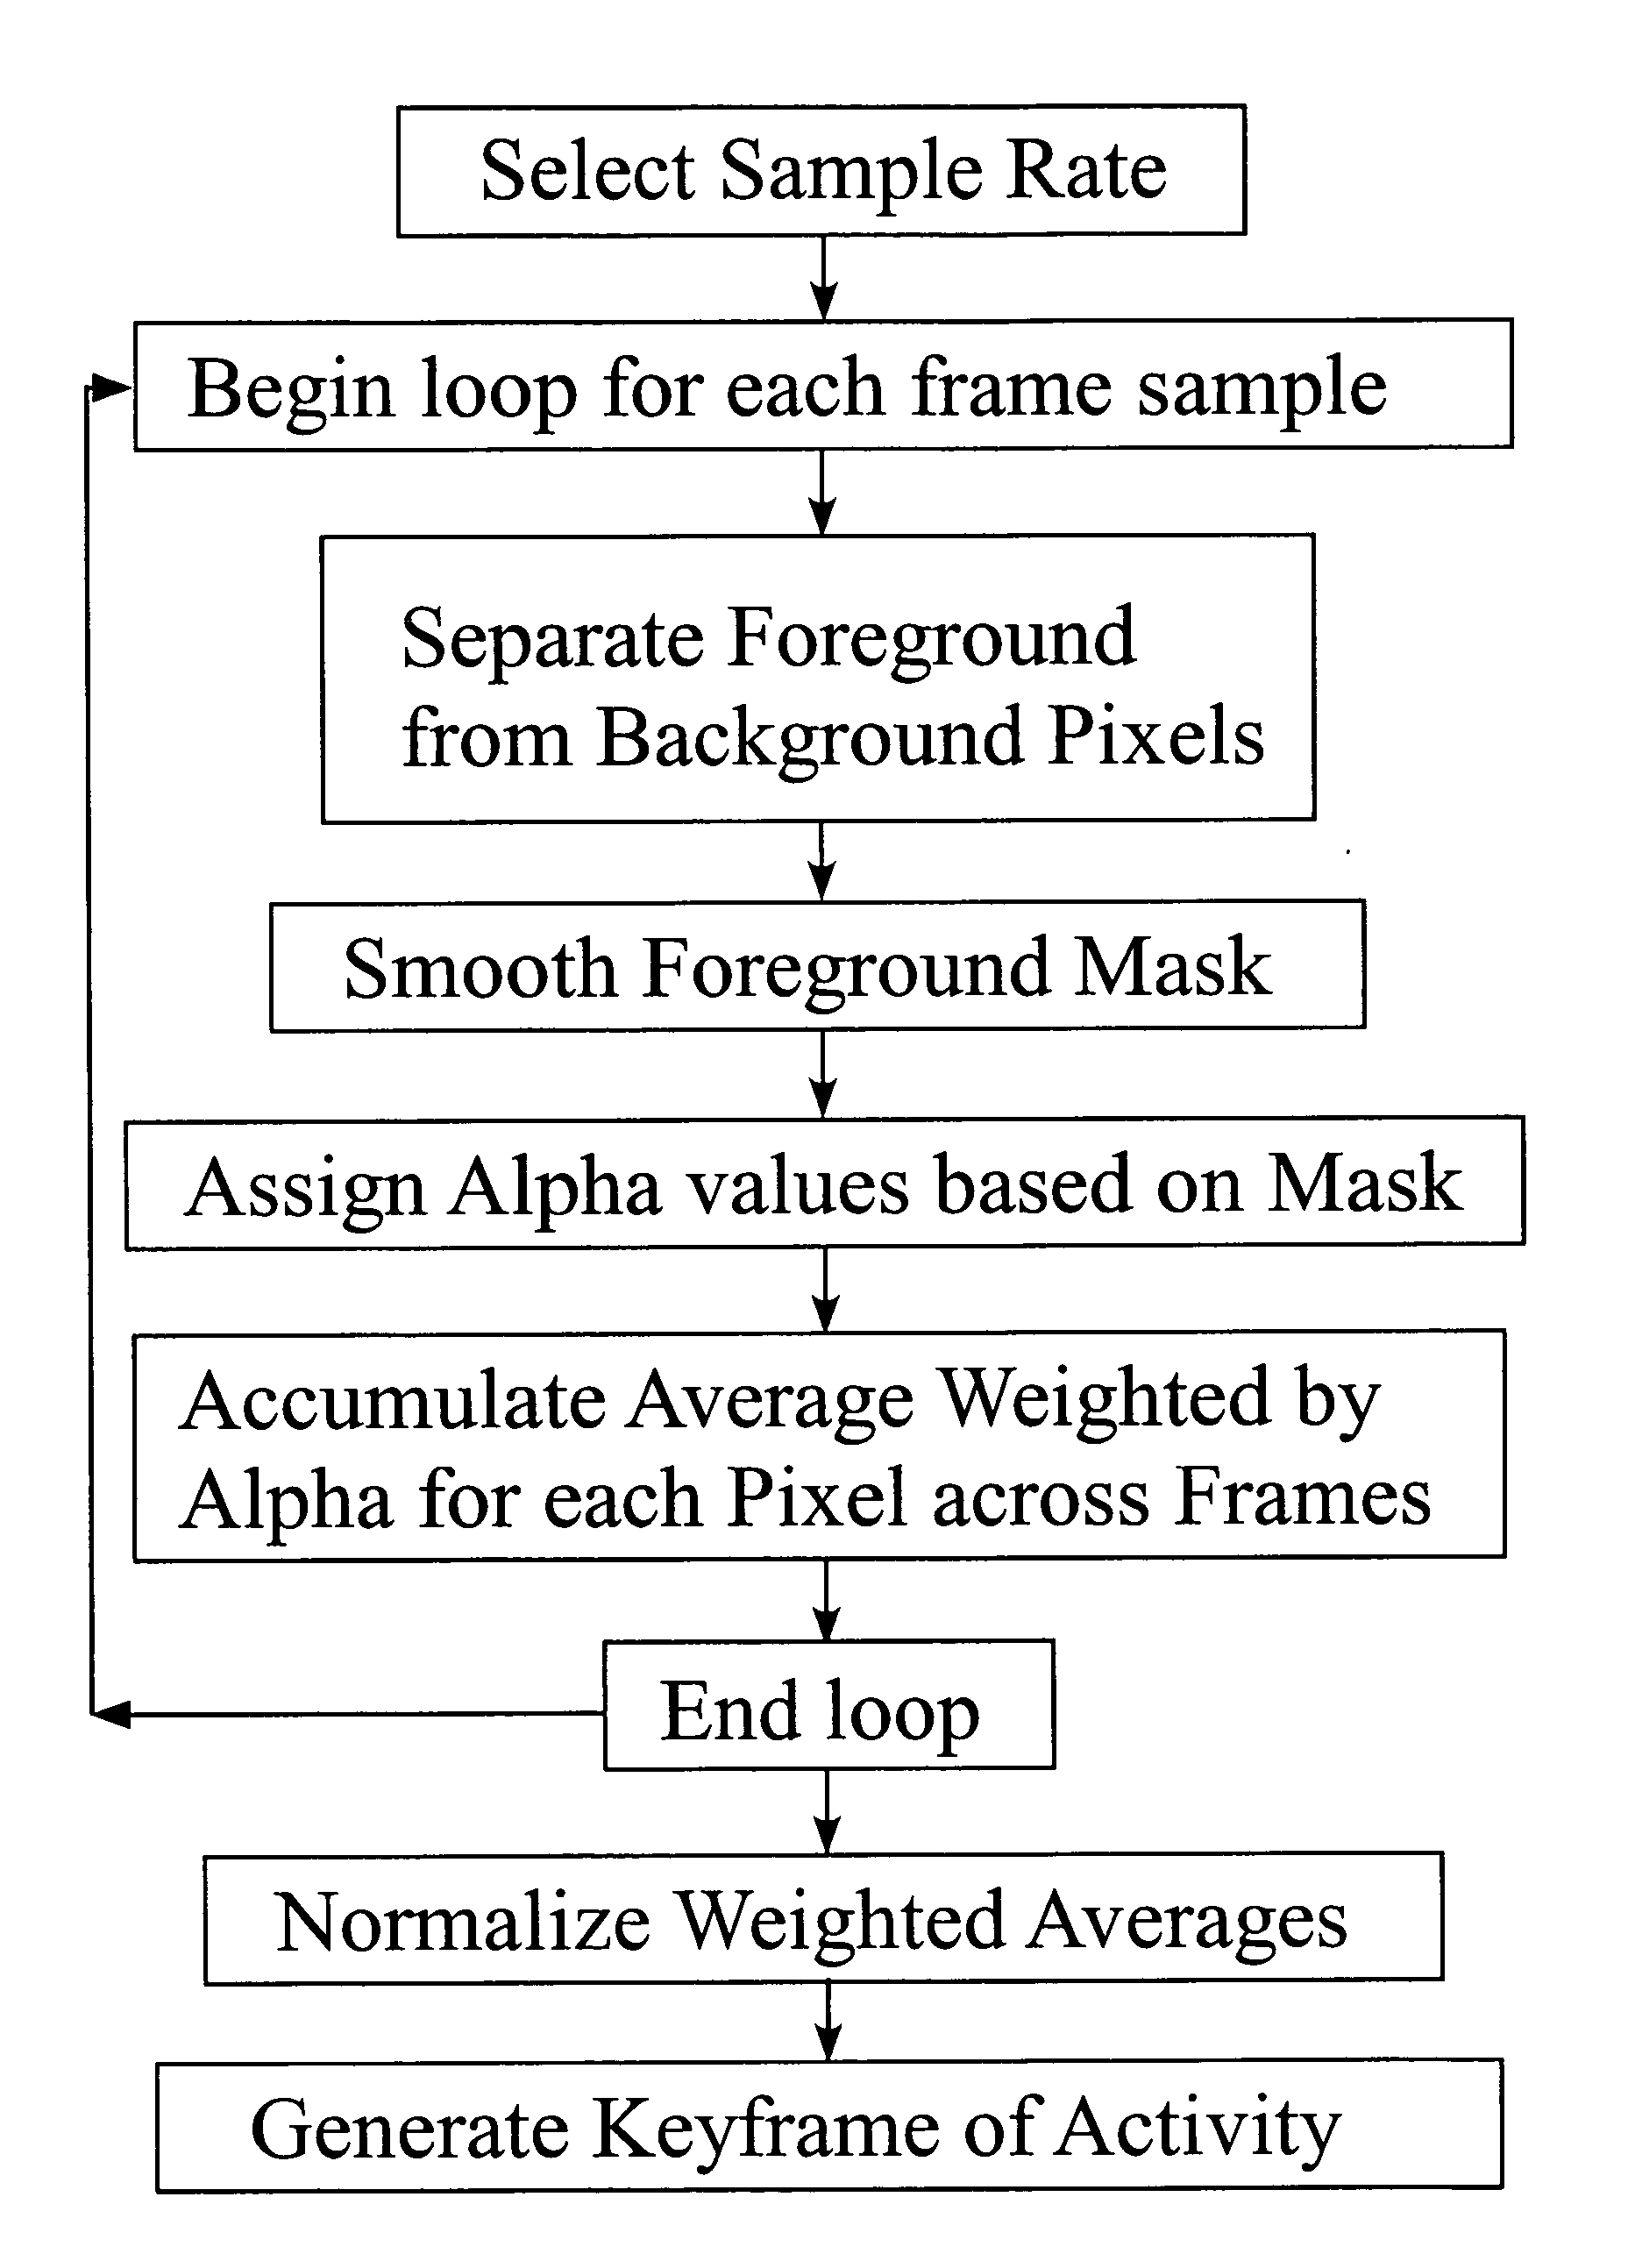 Methods and interfaces for visualizing activity across video frames in an action keyframe